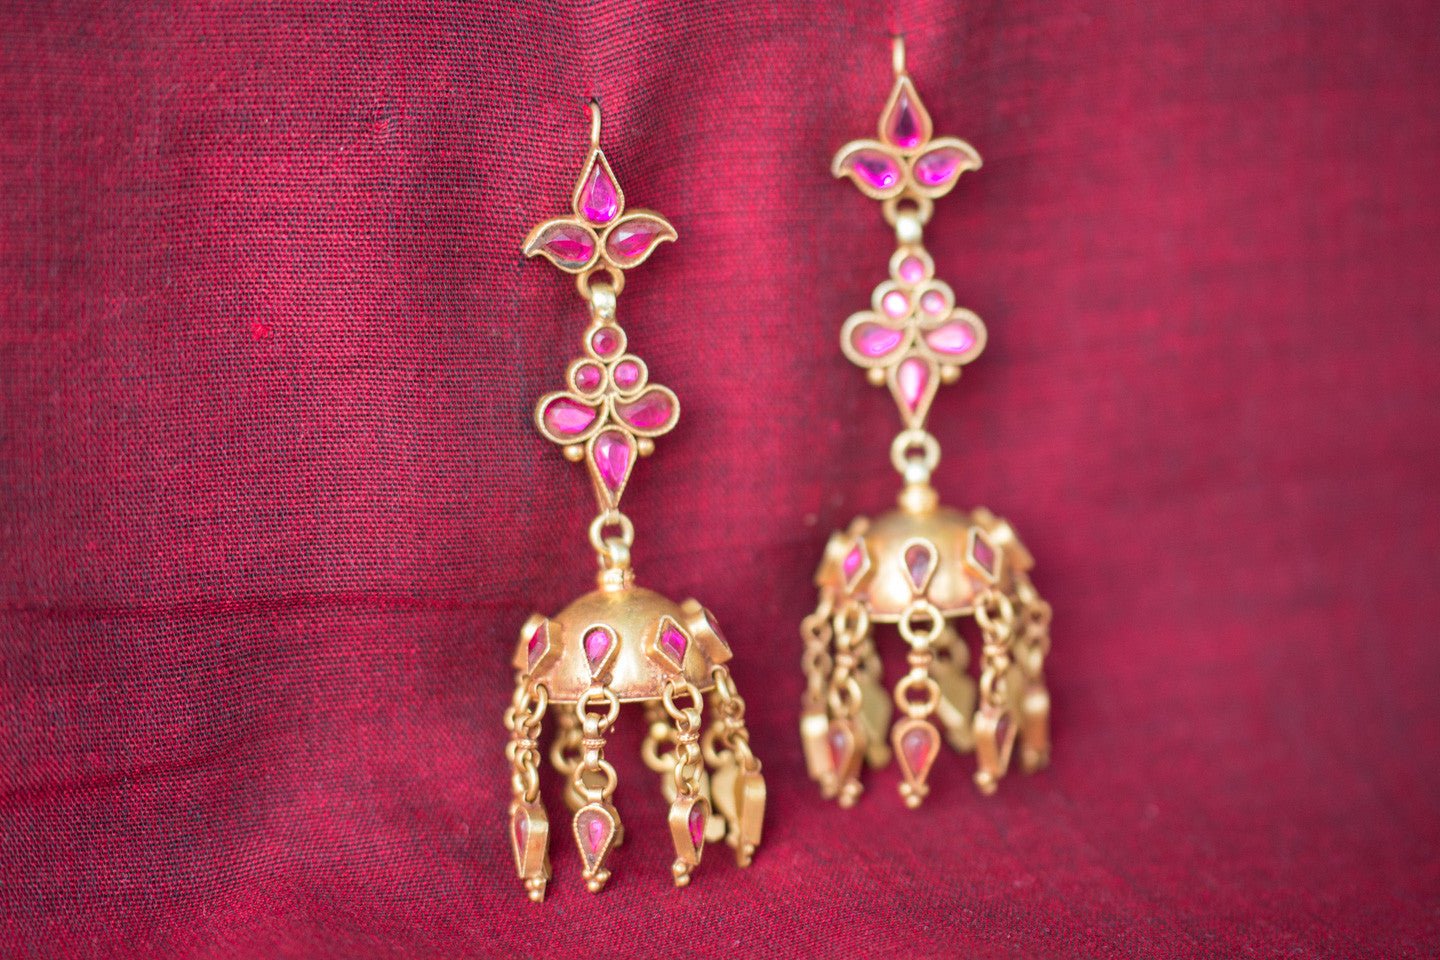 20a426-silver-glass-plated-amrapali-earrings-glass-chandelier-alternate-view